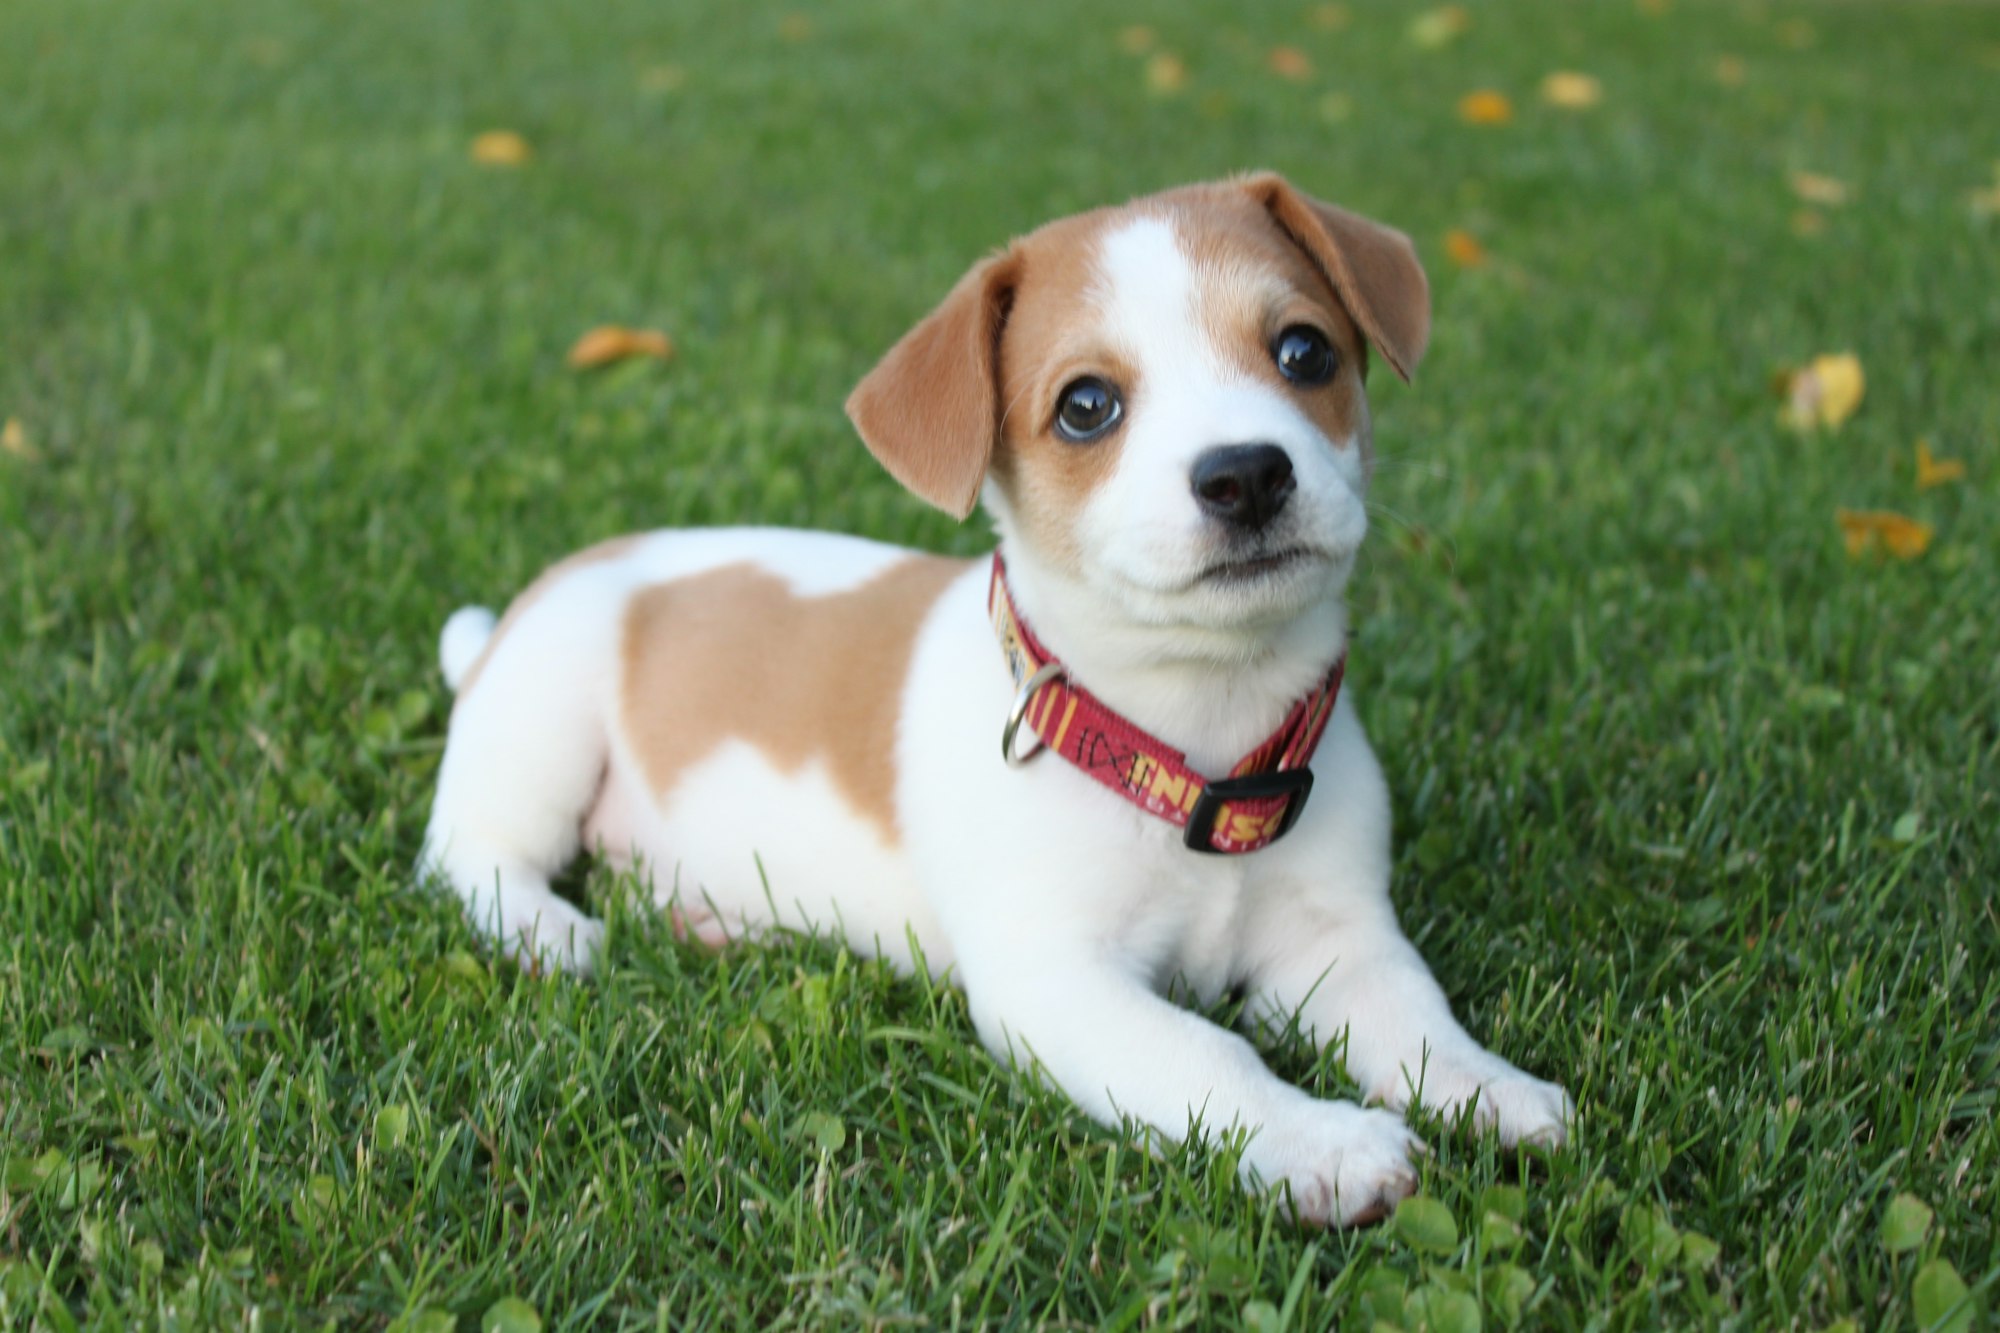 white and brown short coated dog with red collar on green grass during daytime